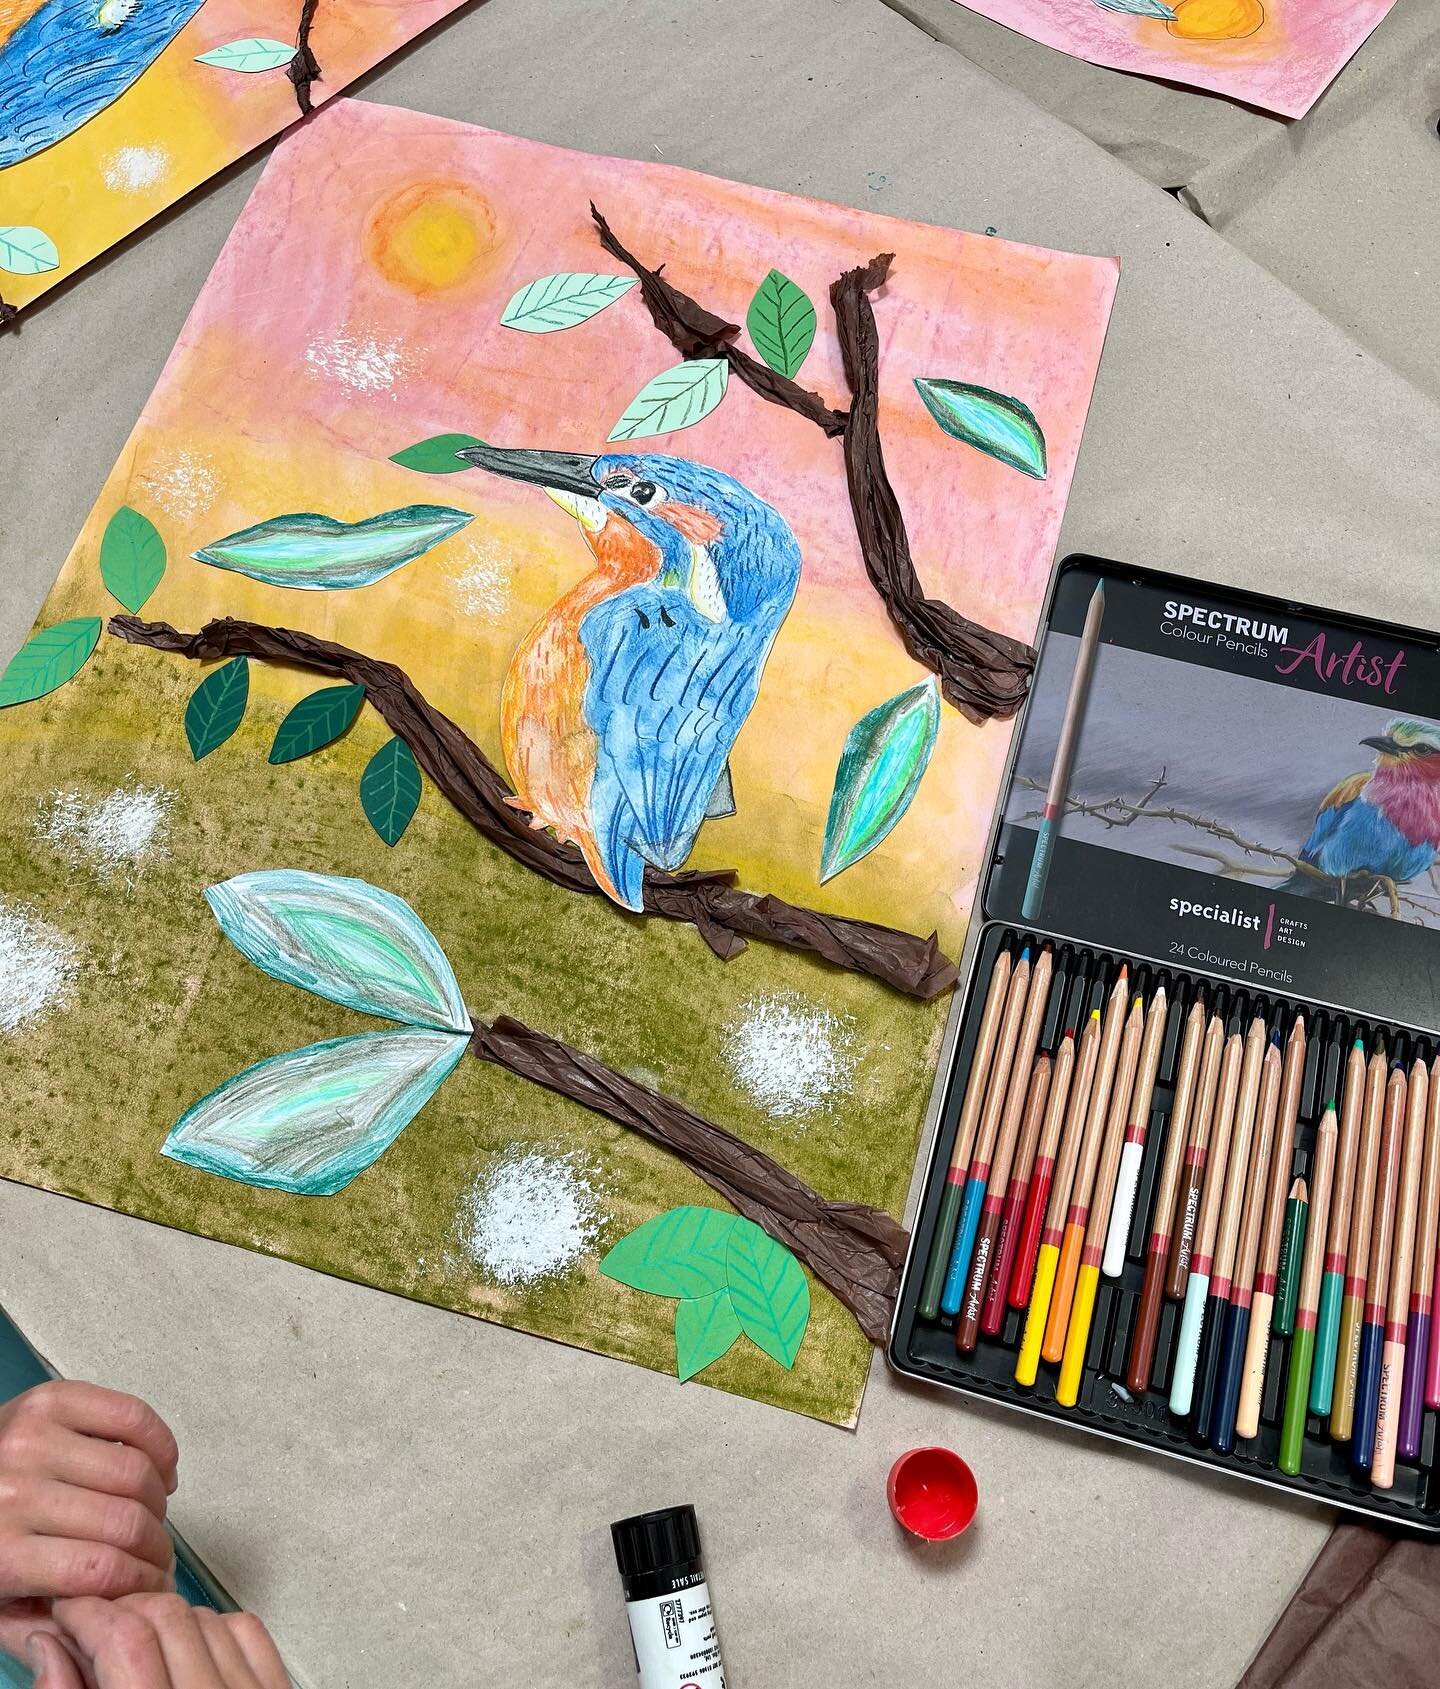 Holiday Workshops have begun 🥳
We started our 6+ Art Classes creating a communication of Kingfishers inspired by the incredible @jogrundyart . Her enchanting artwork was a wonderful inspiration and we had so much fun creating them. 
.
We&rsquo;re ve